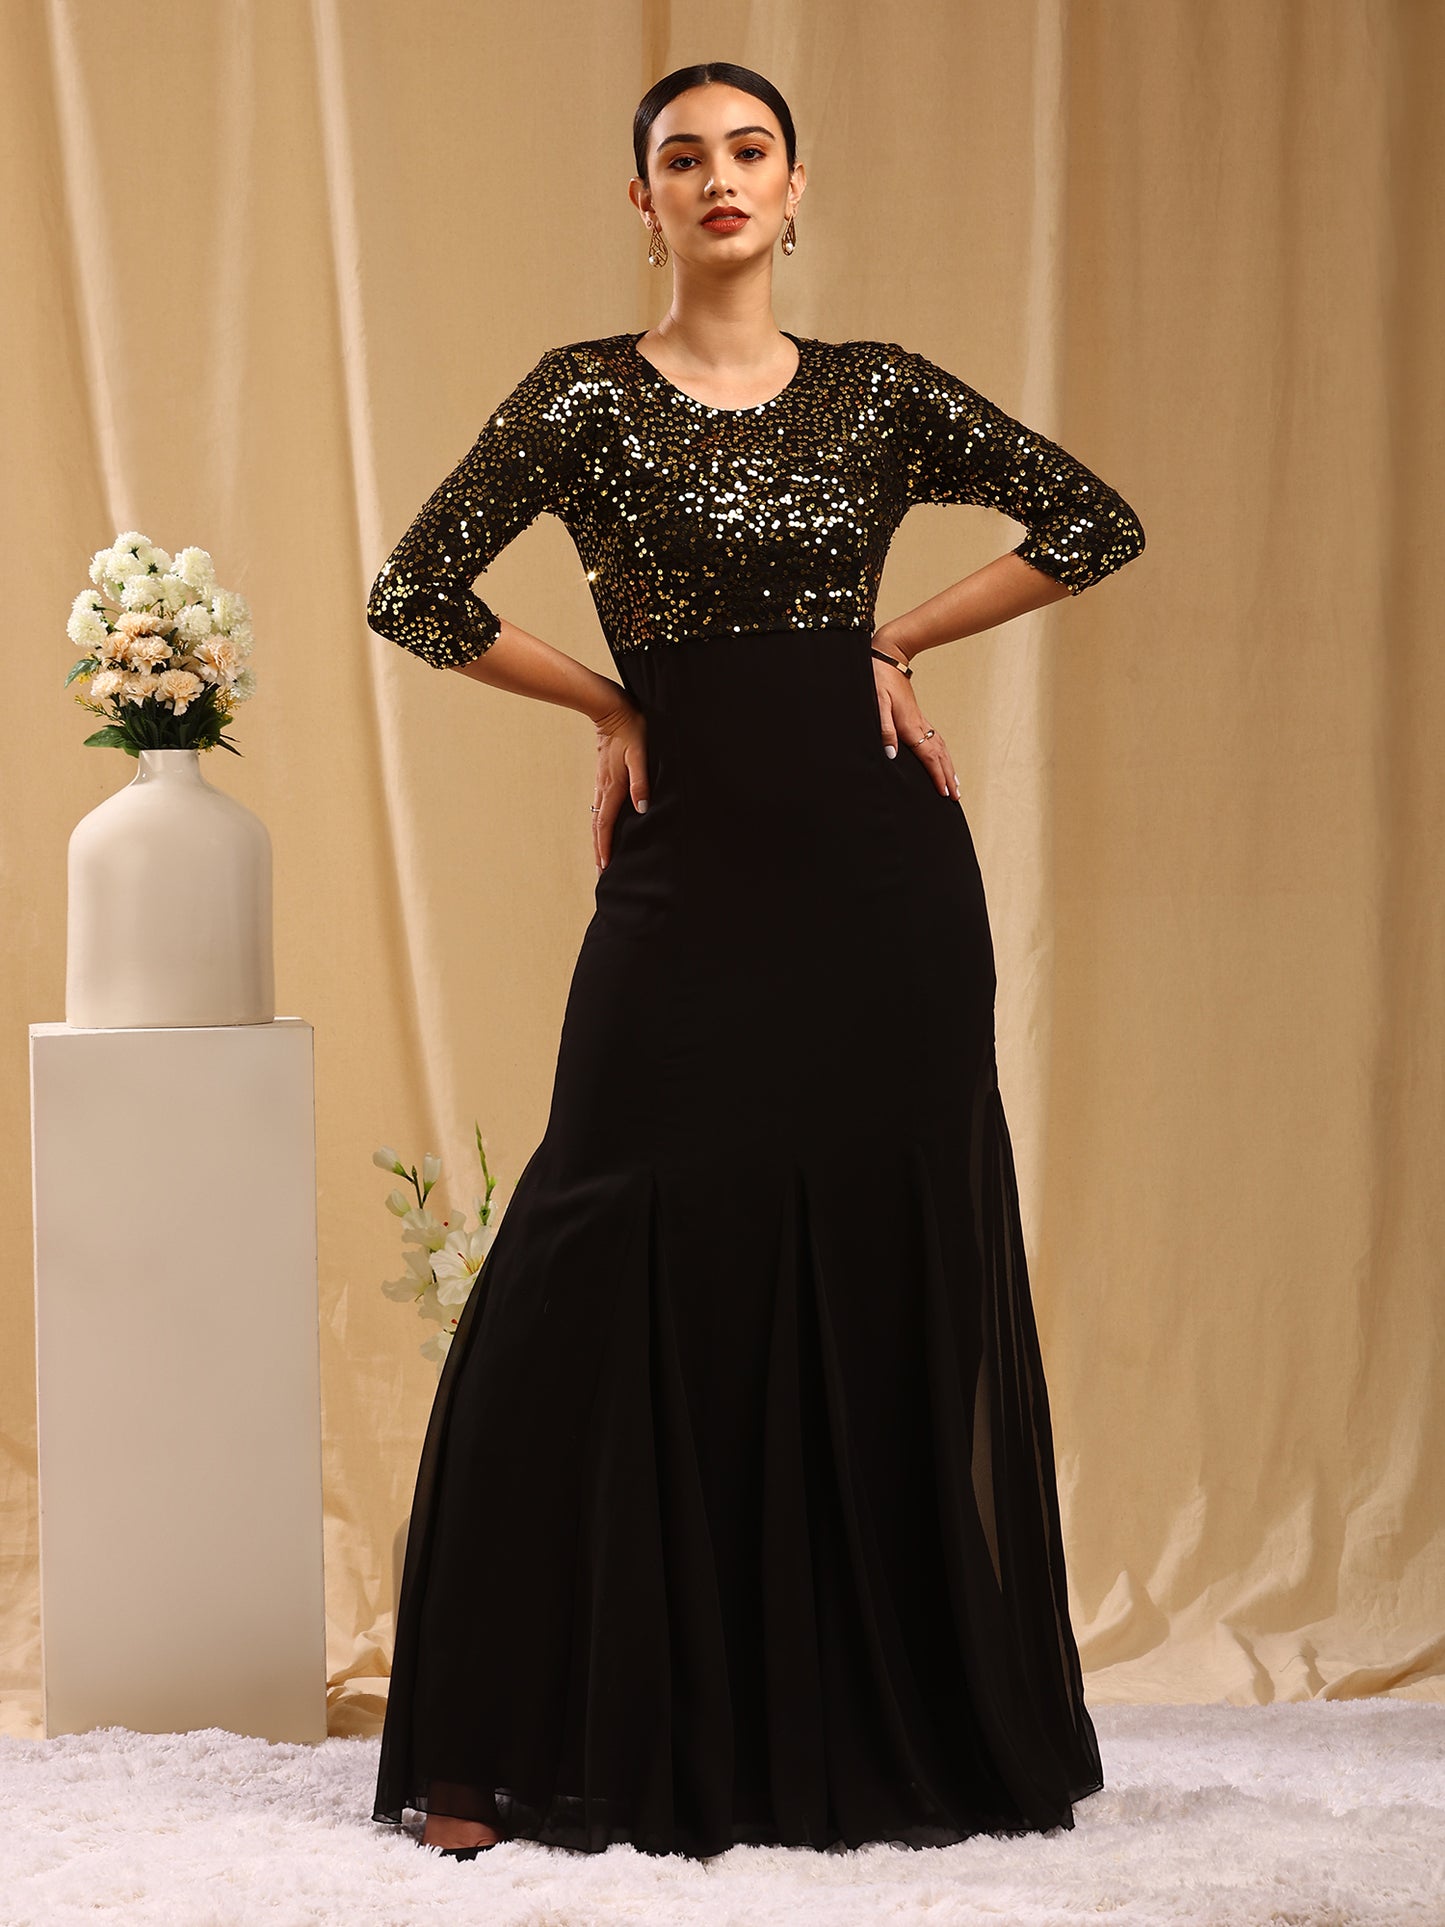 Gold & Black Embellished Gown with 3/4 Sleeves